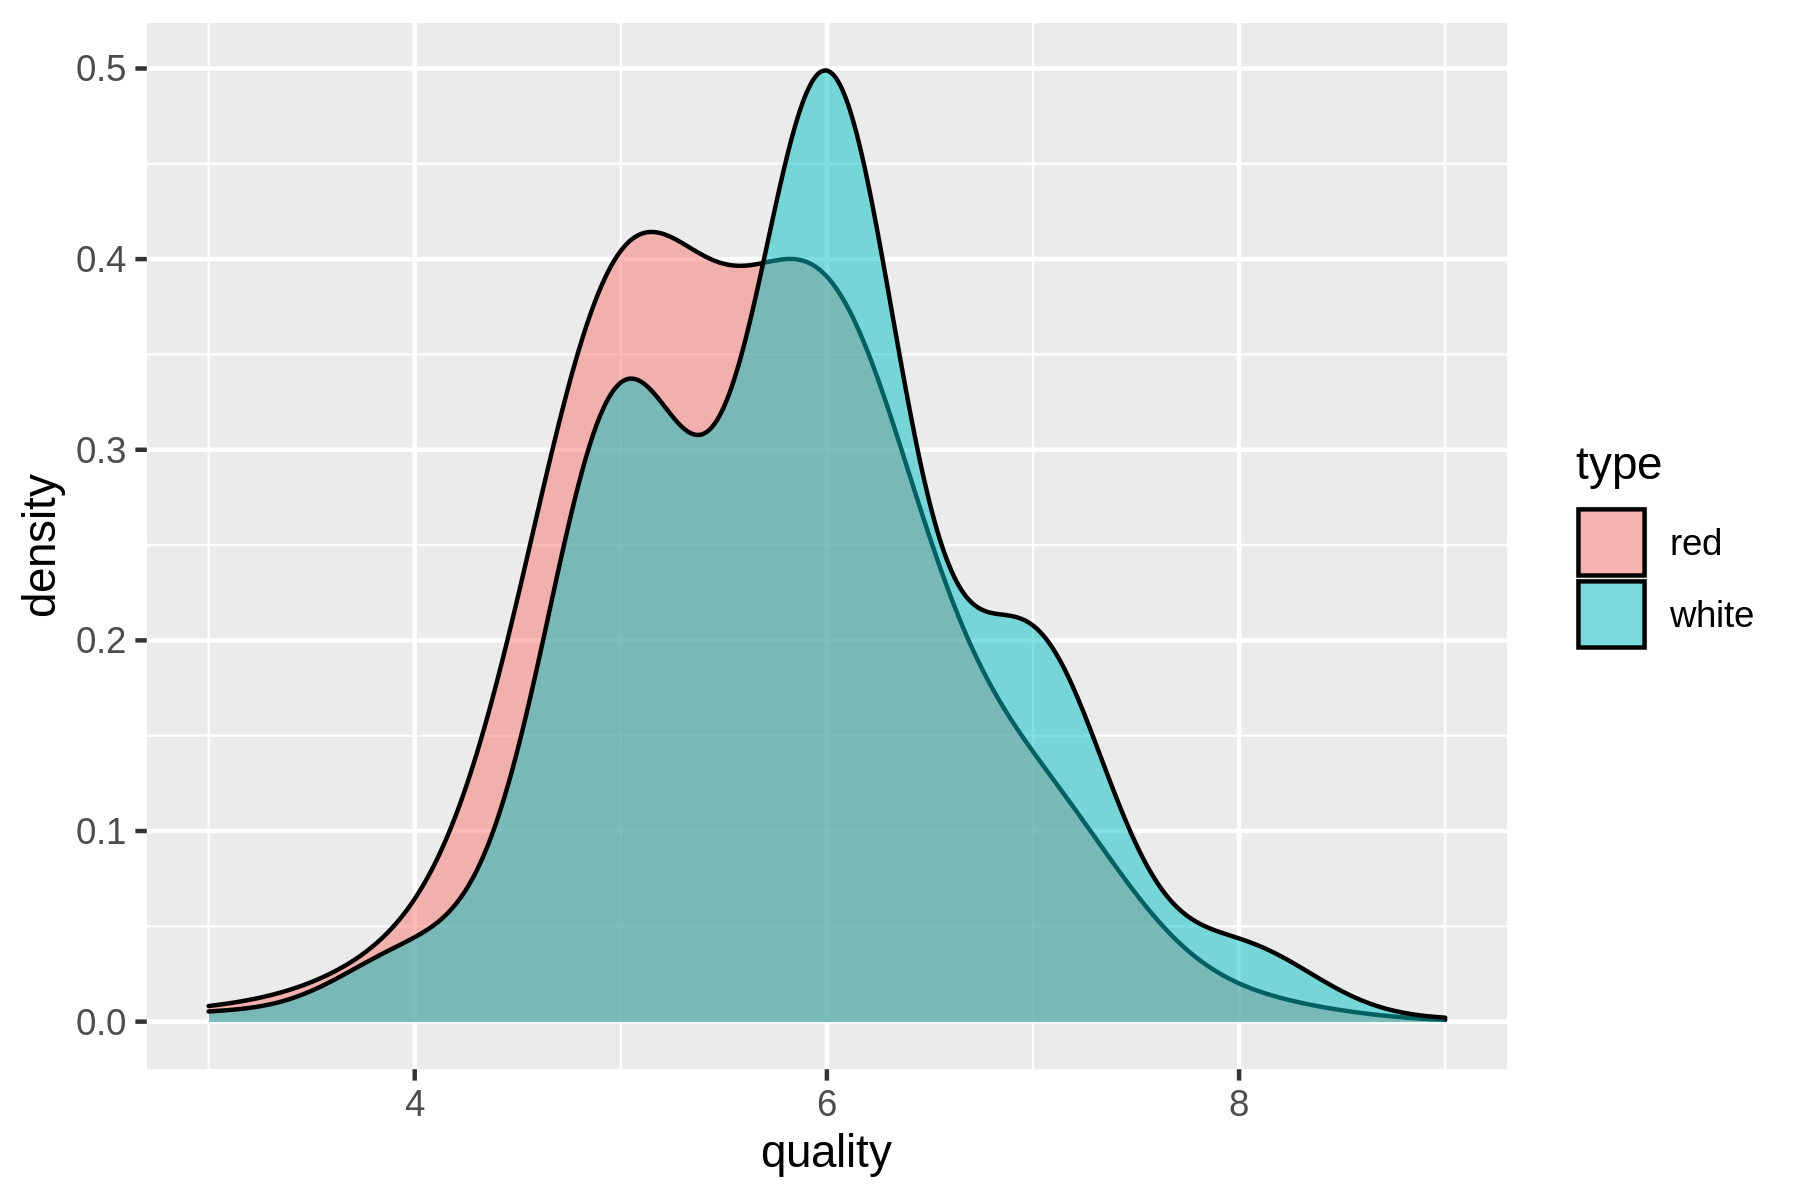 Comparing the quality of red and white wines using a density plot